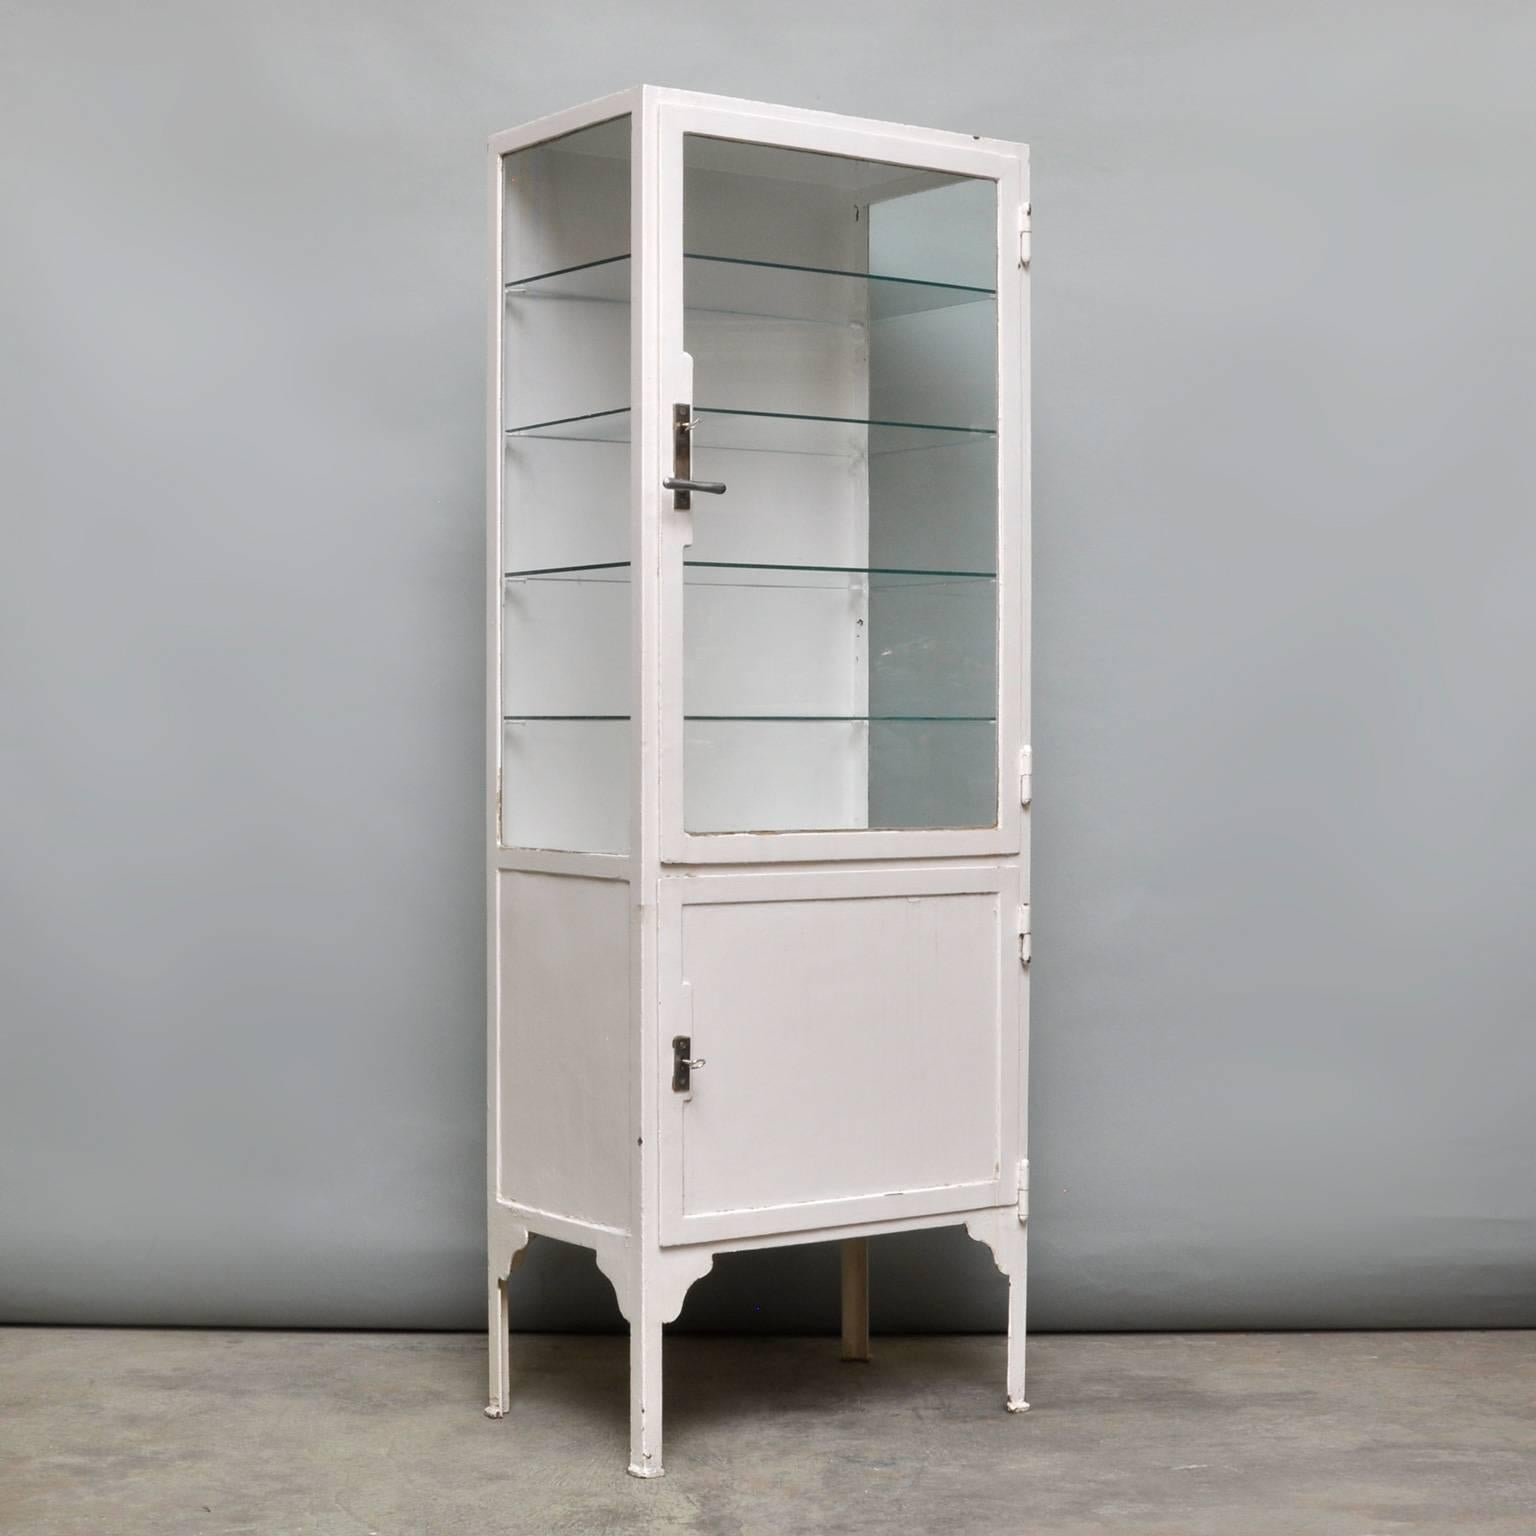 This medicine cabinet was produced in the 1940s in Hungary. Made of thick iron and antique glass. It features four glass shelves. Heavy quality.